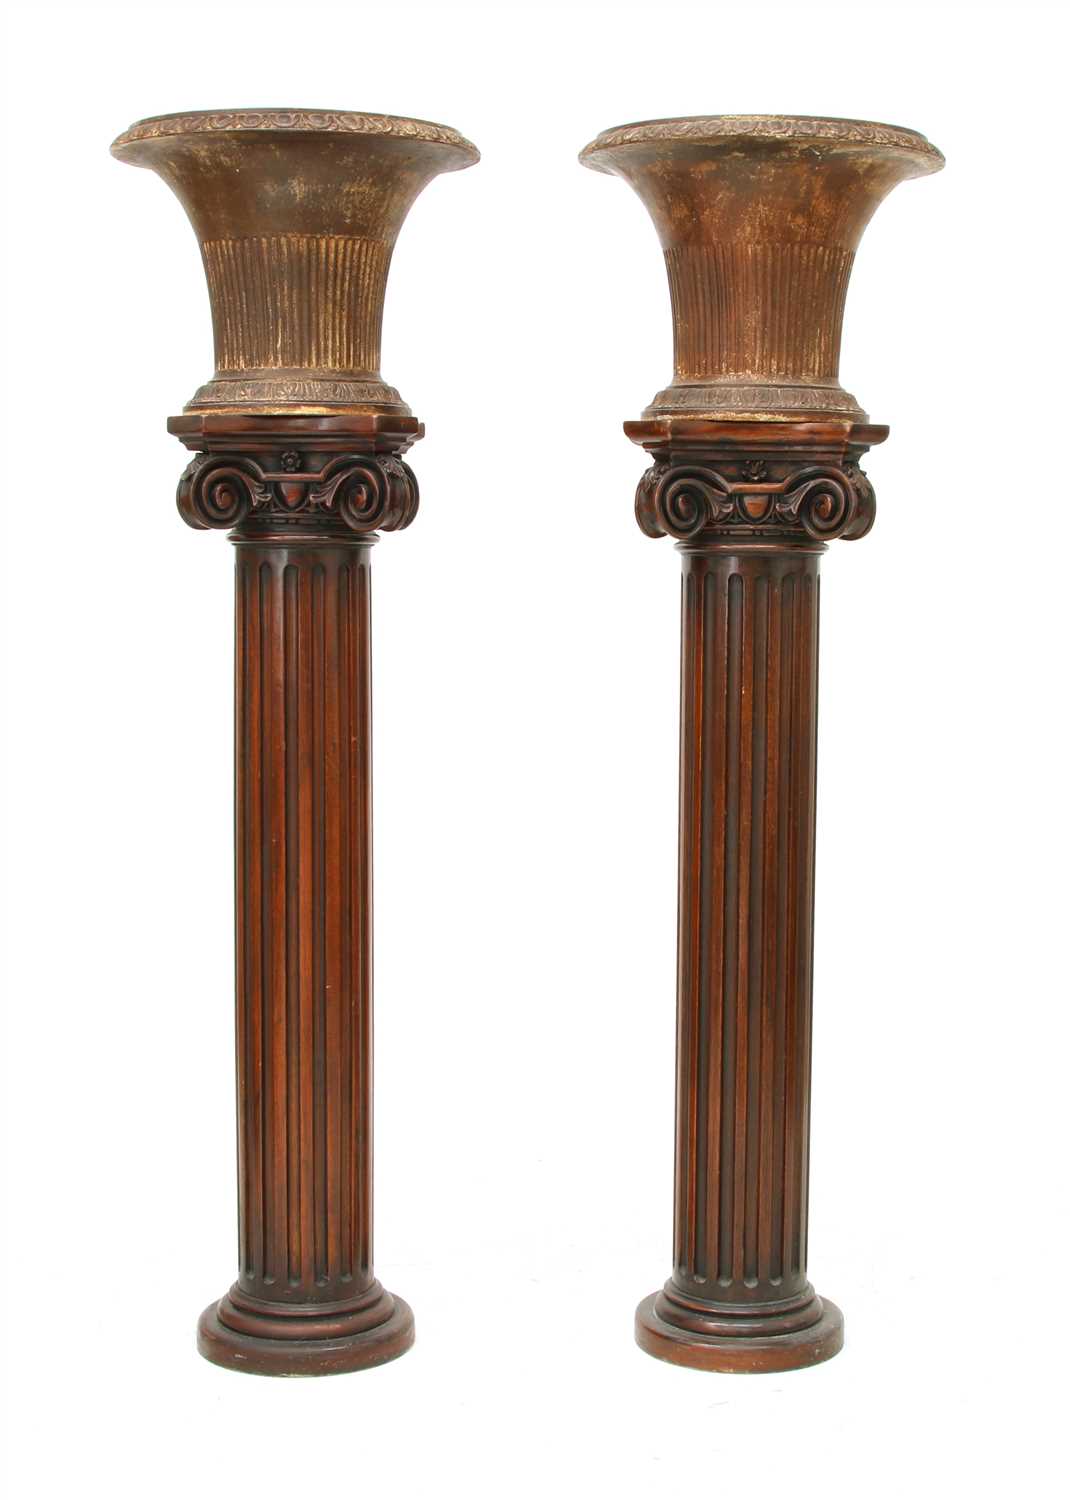 Lot 52 - A pair of iron urns